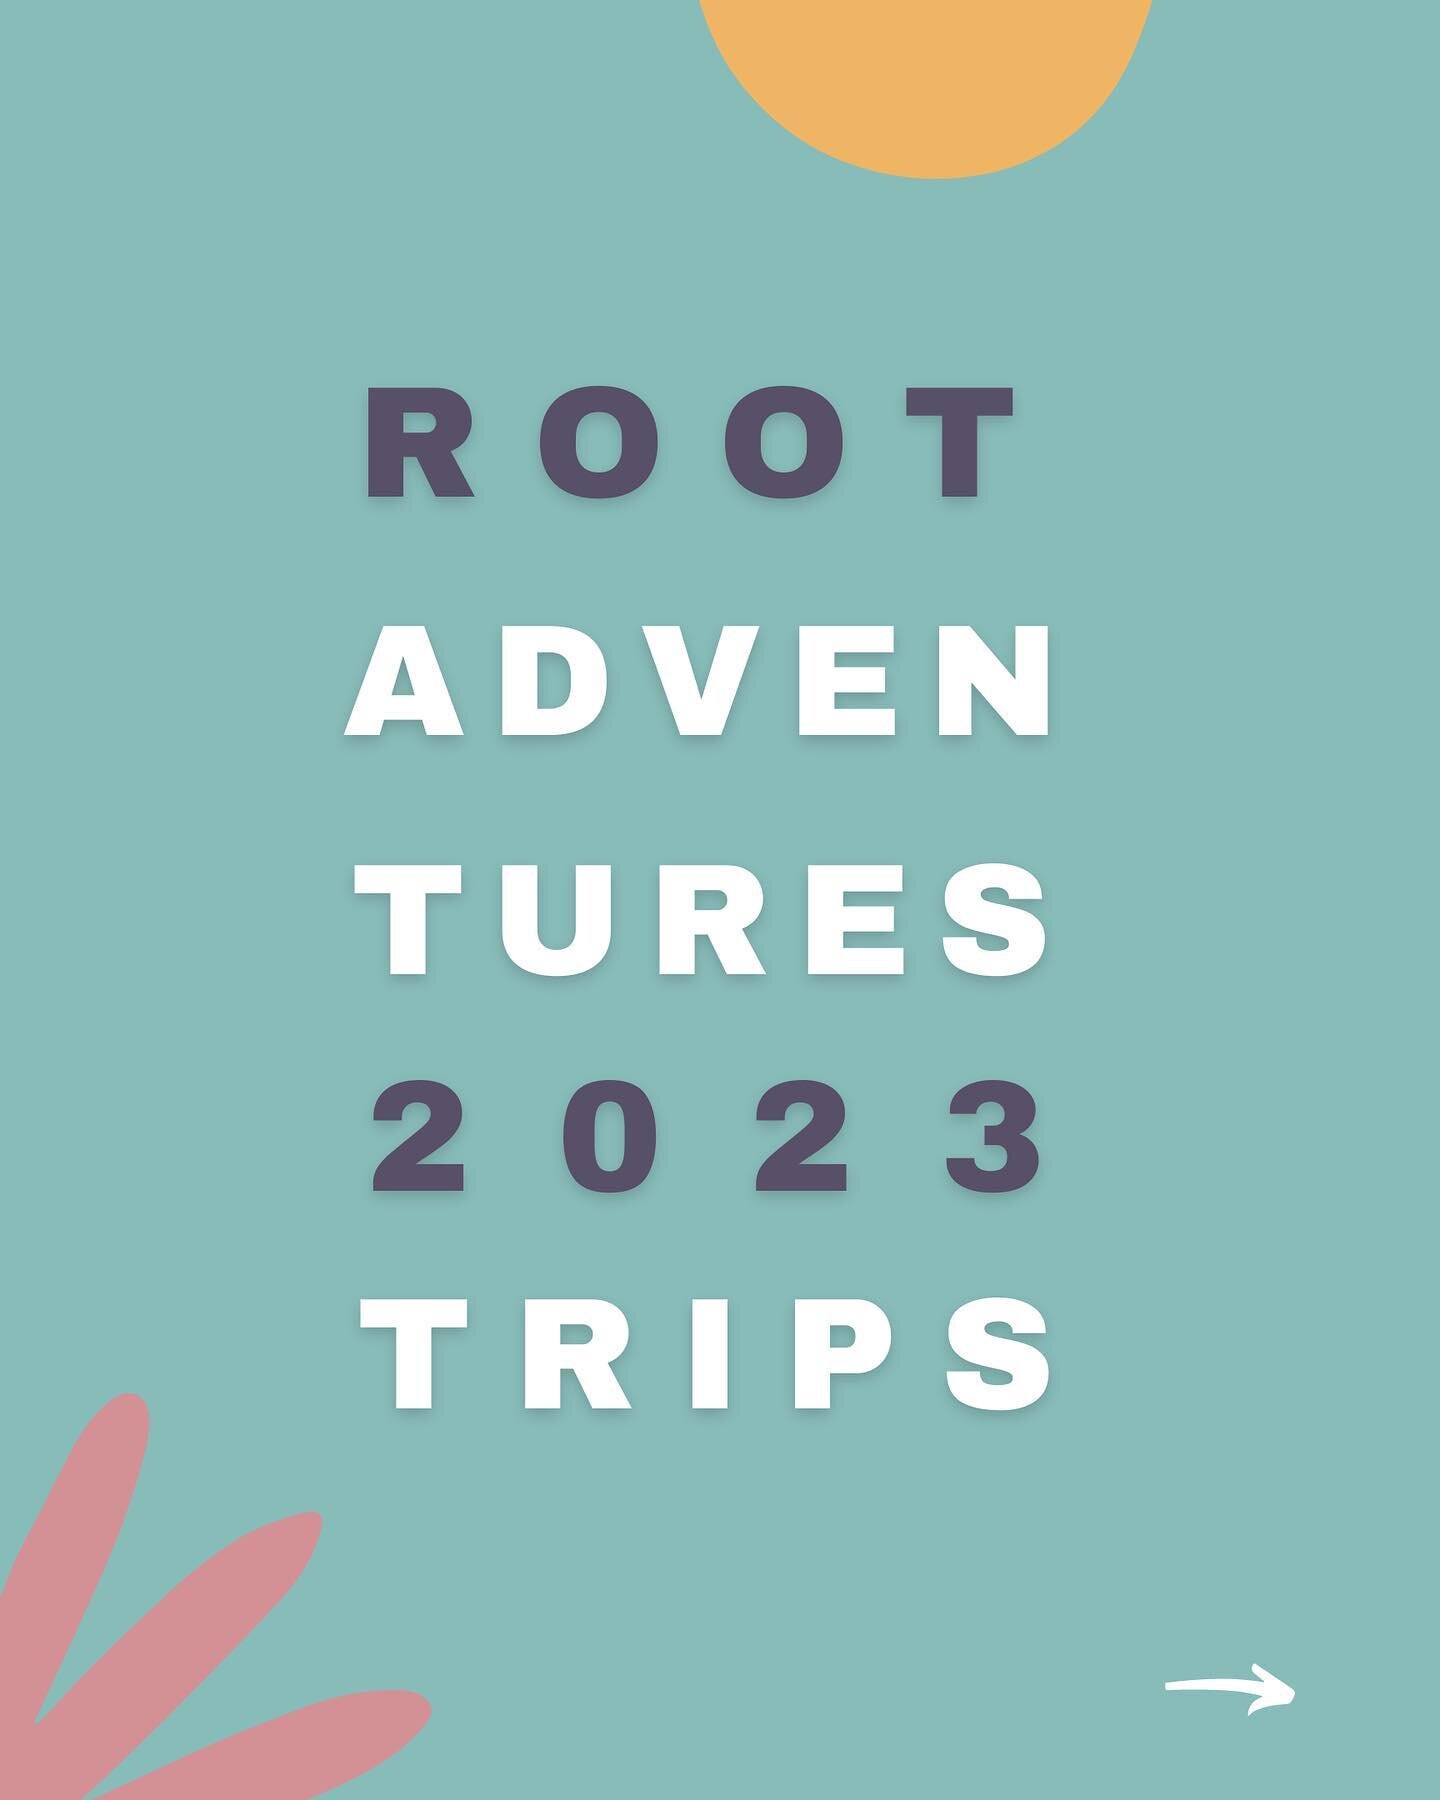 Check out the rest of our Root trips for 2023.

From a solar eclipse glamping experience in Utah to migratory kayaking in trip in the San Juan Islands. We&rsquo;ve got something for everyone.

Which trip of these adventures is your dream trip?!?

#mo